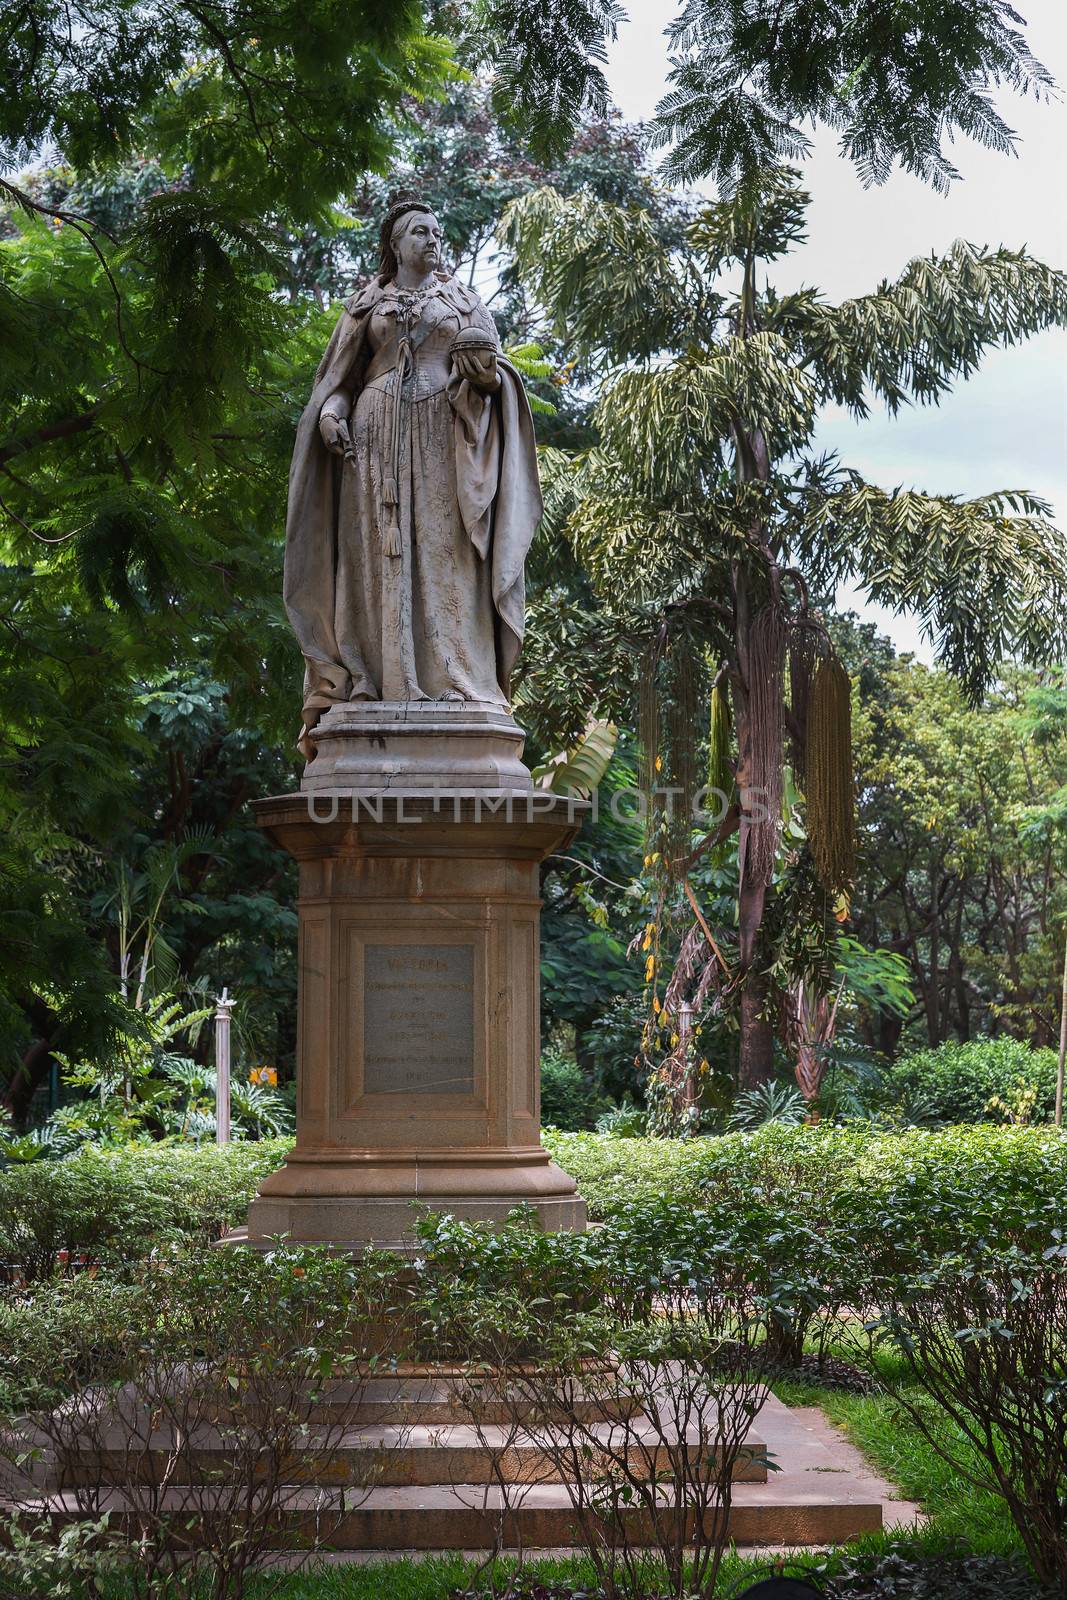 Statue of Queen Victoria stands at the edge of Cubban Park in Bangalore.